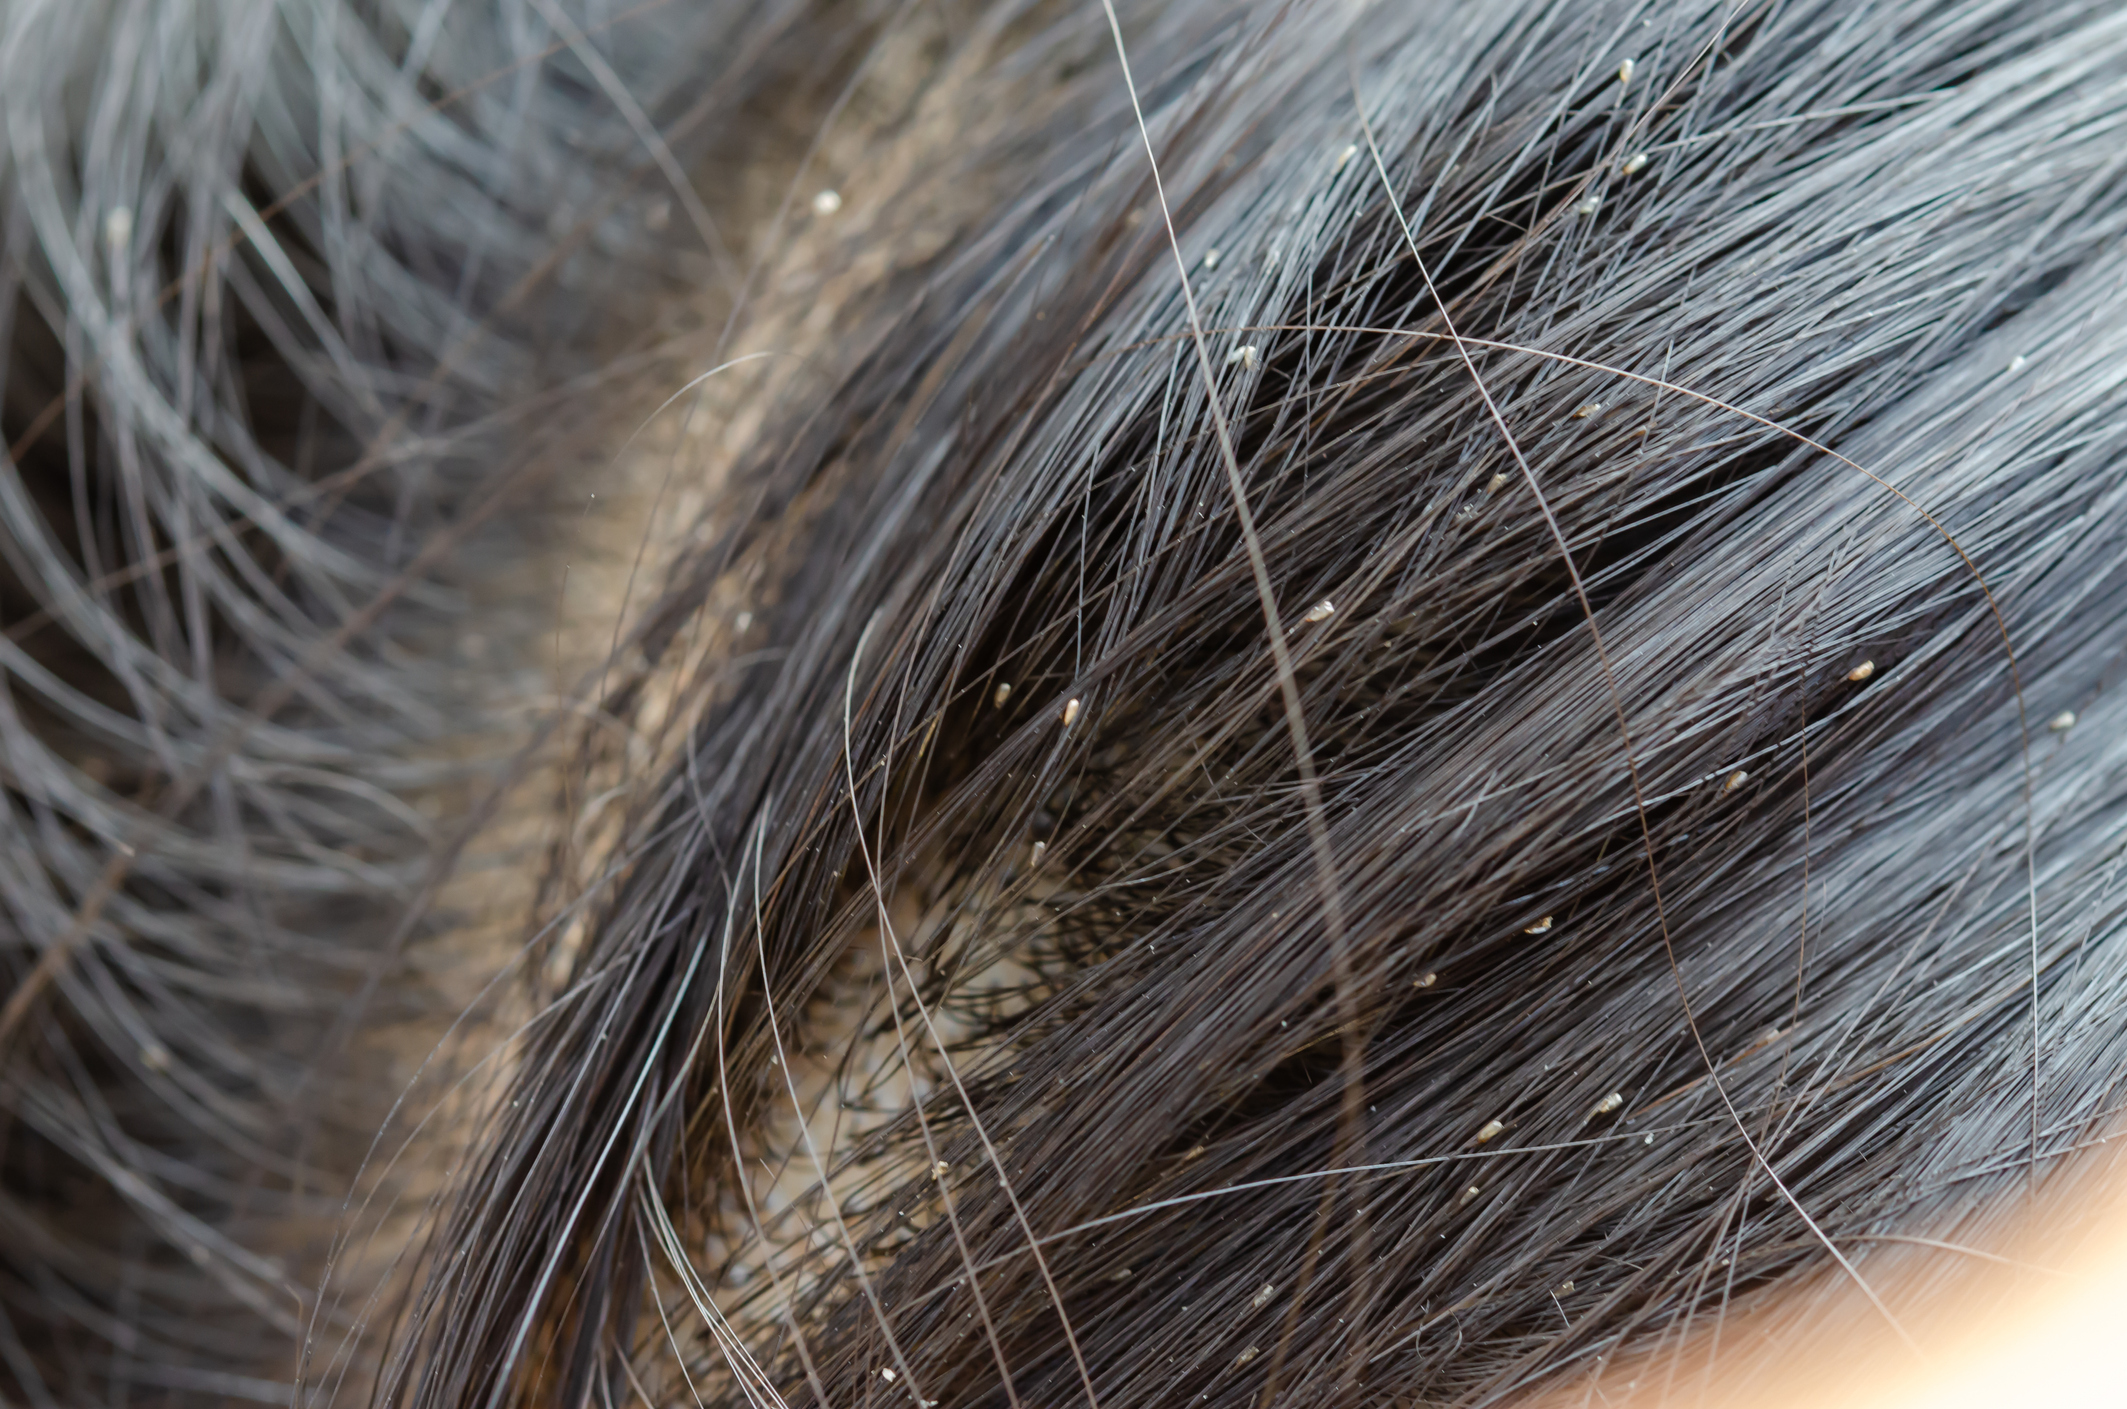 Picture of nits in hair